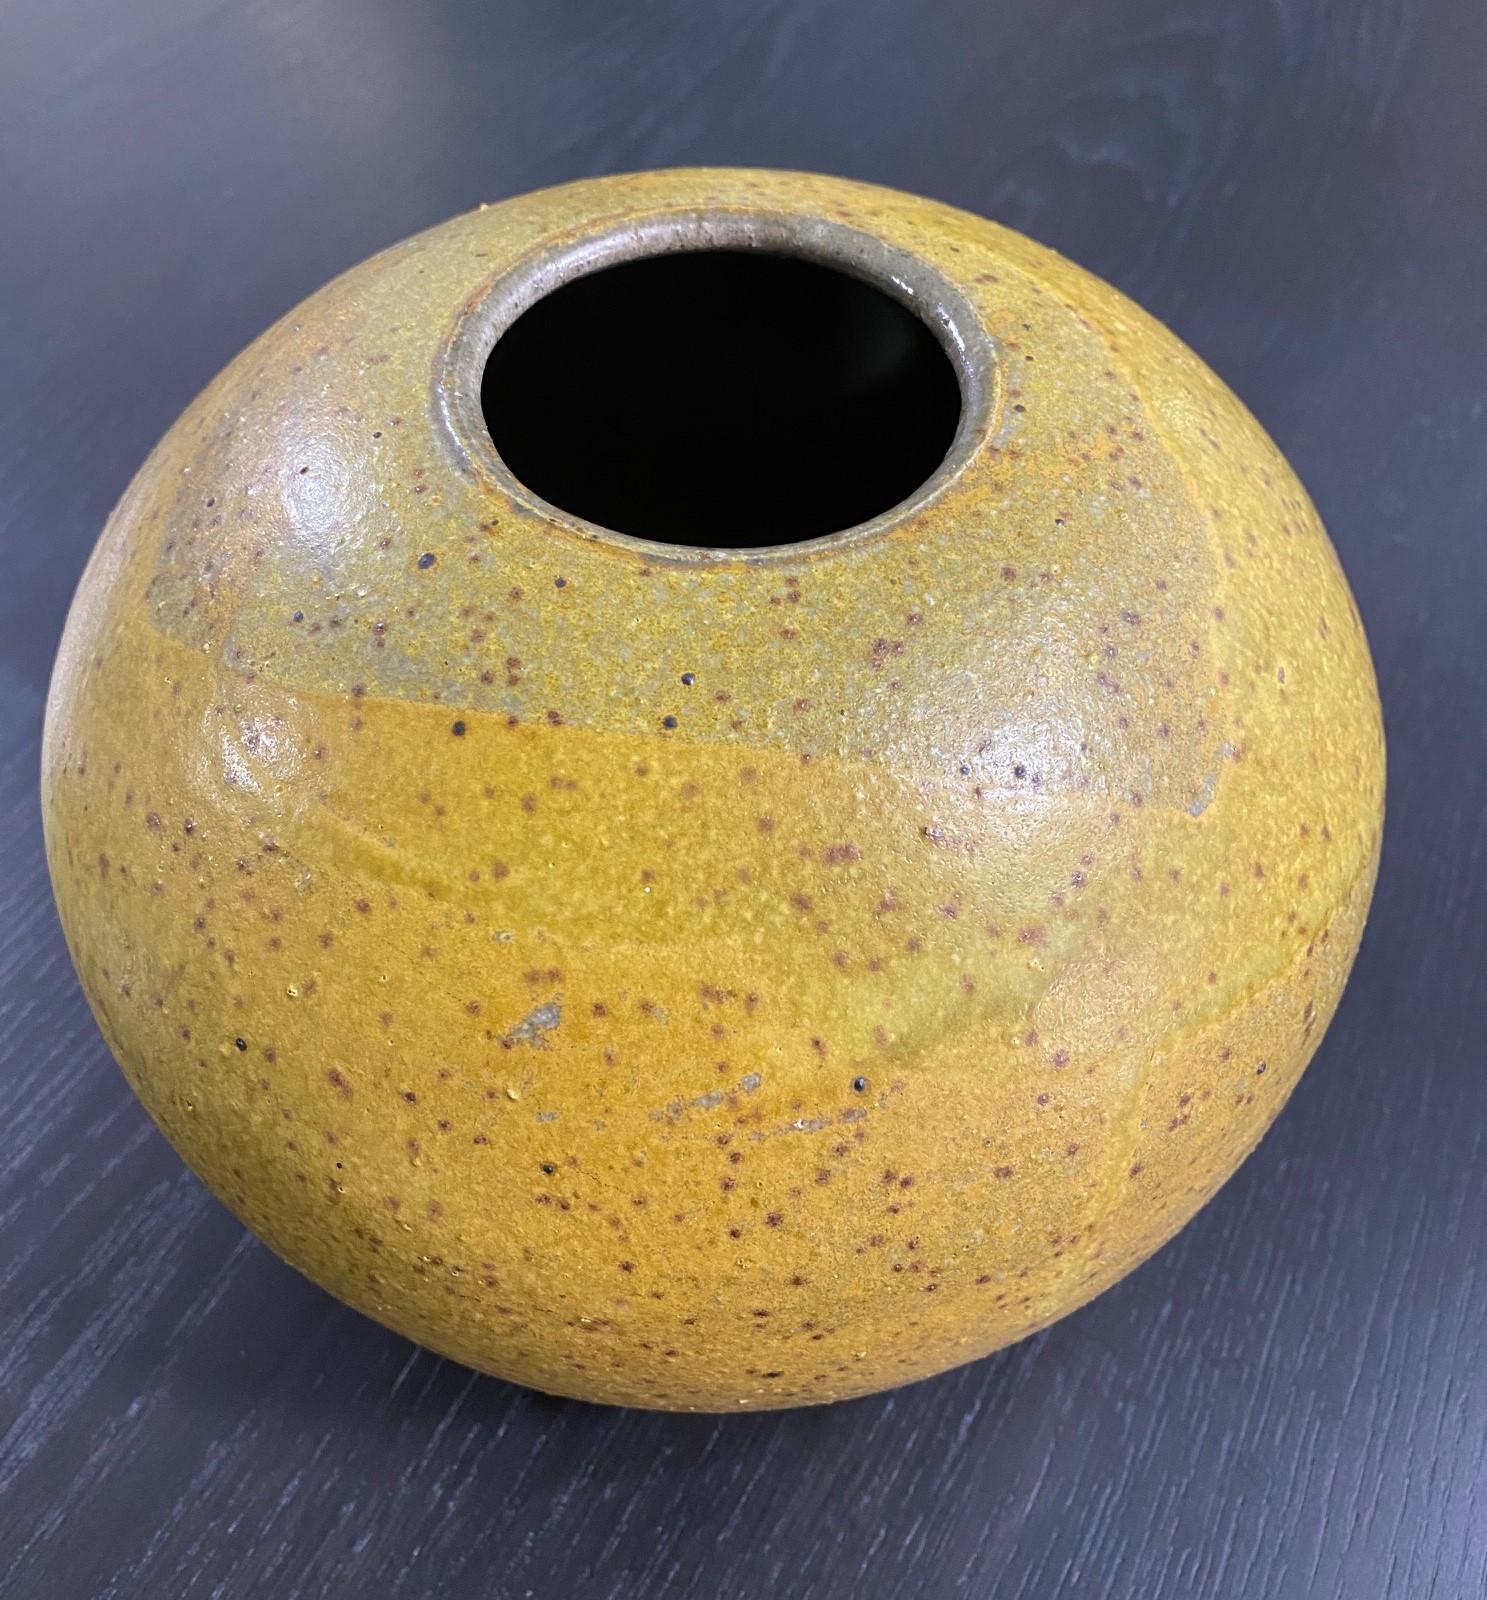 A wonderful work by East Coast/ Massachusetts master potter William Wymann. This piece features a rich, lava-like yellow speckled glaze. 

Wymann, who received his master's at Columbia University, was the founder (along with fellow potter Michael